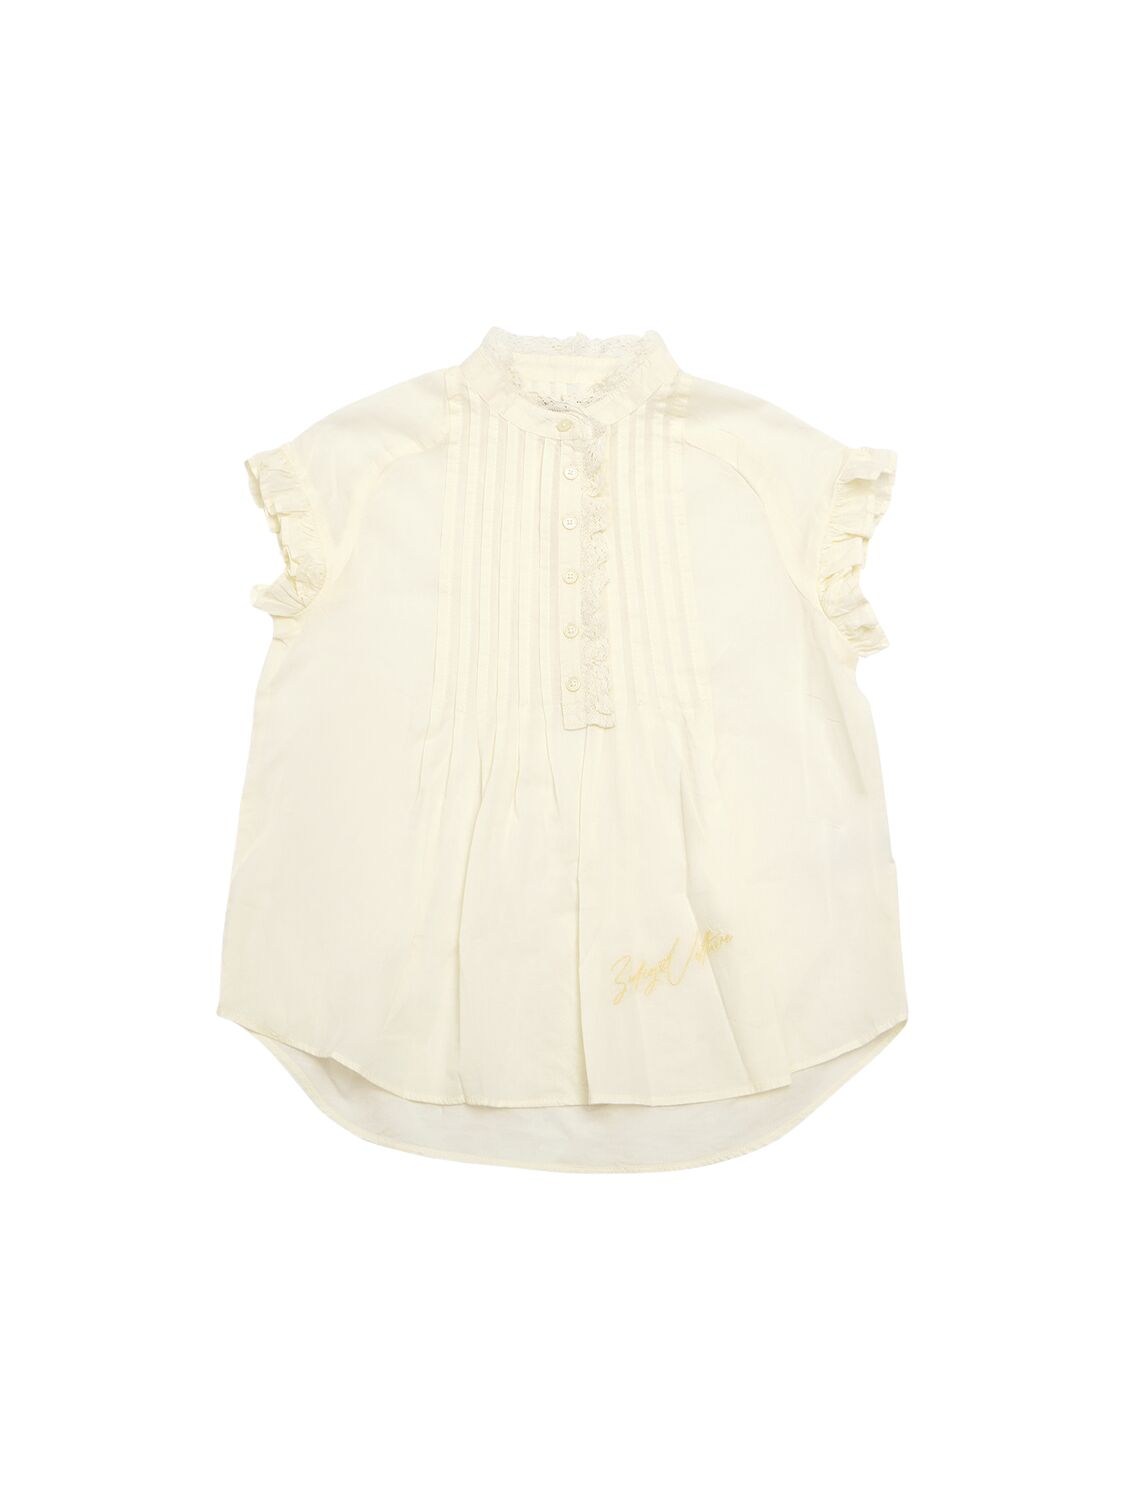 Zadig & Voltaire Kids' Cotton Short Sleeved Shirt W/ Lace In Beige